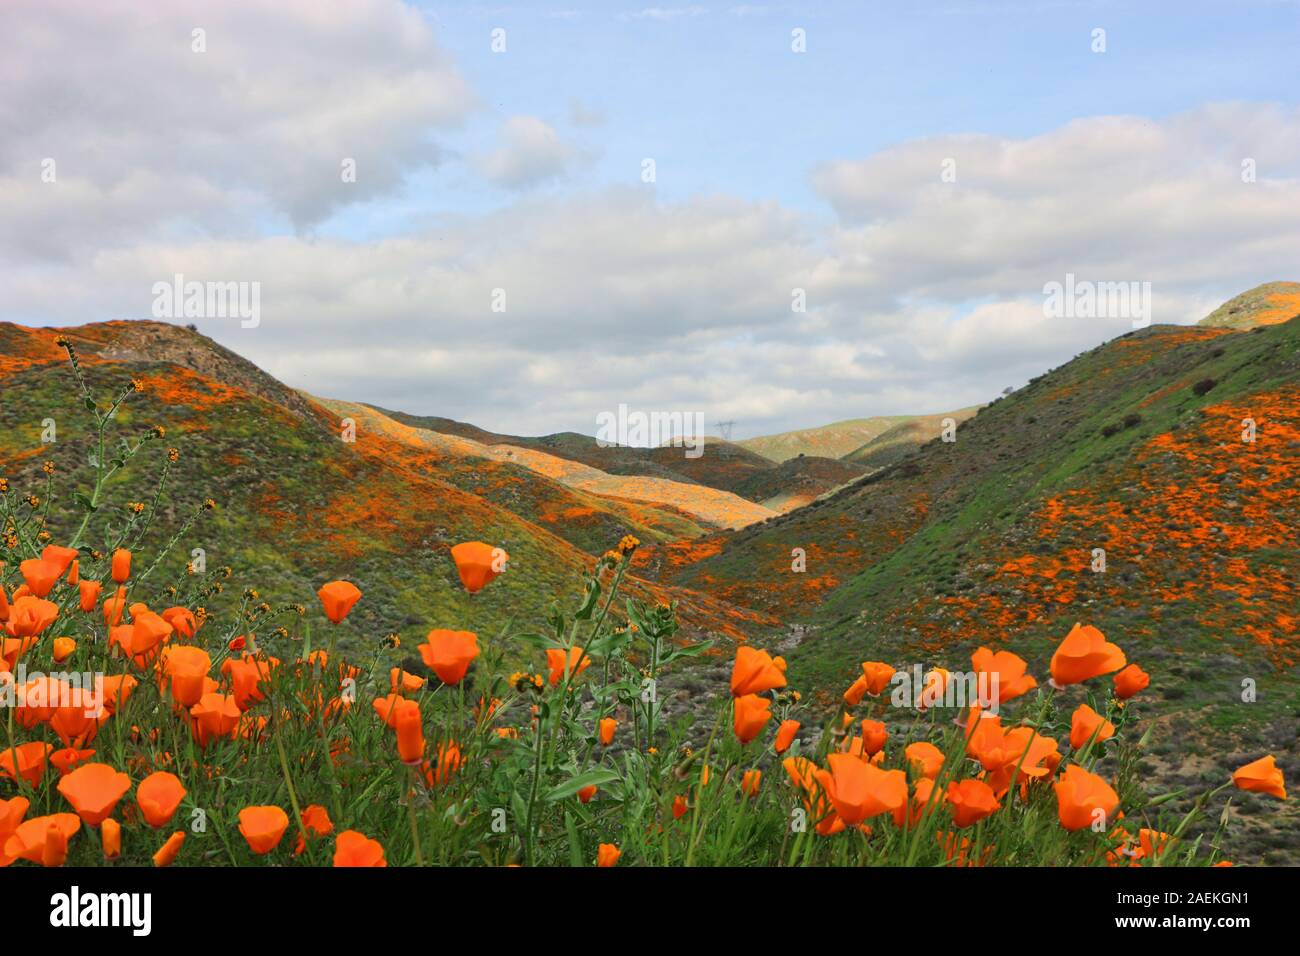 Super bloom of California wild poppy flowers in the Lake Mathews Estelle Mountain Reserve, CA, USA, March 2019 Stock Photo